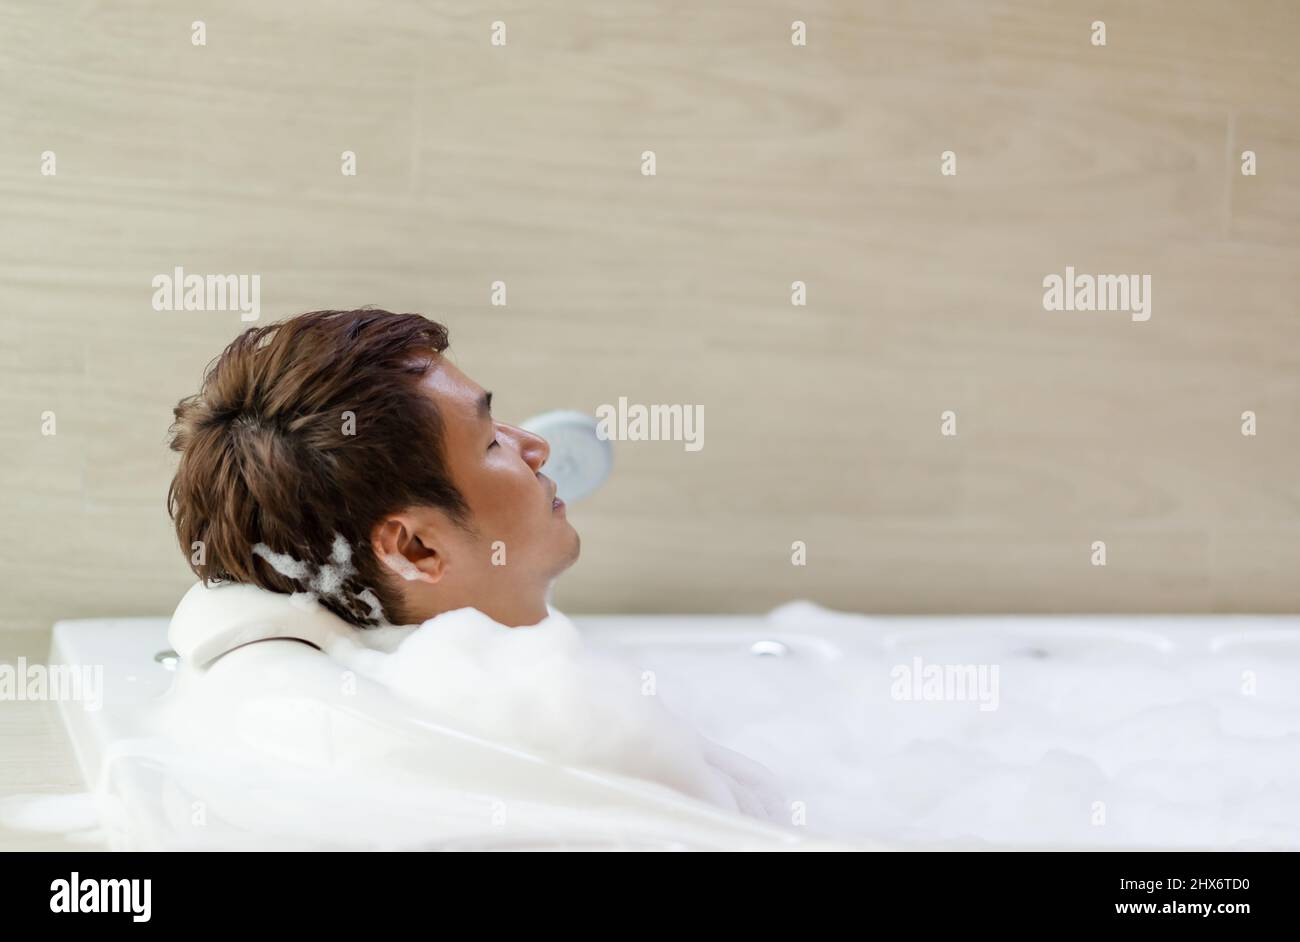 young man relaxing in bathtube with eyes closed in bathroom Stock Photo